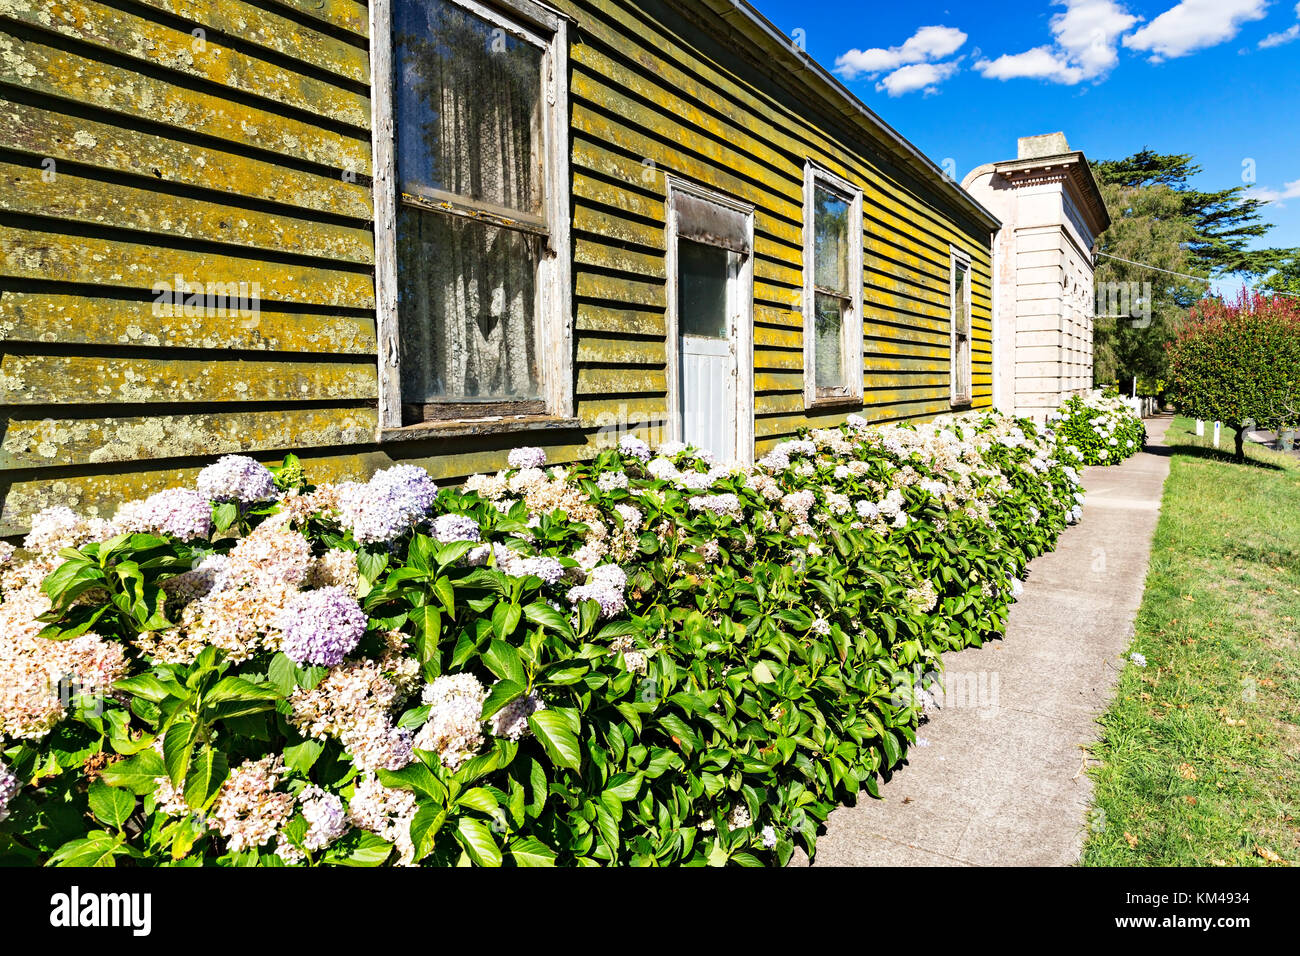 Old weatherboard house in Learmonth Victoria Australia.Learmonth is an outer suburb of Ballarat.Sunraysia Highway,B220 route. Stock Photo